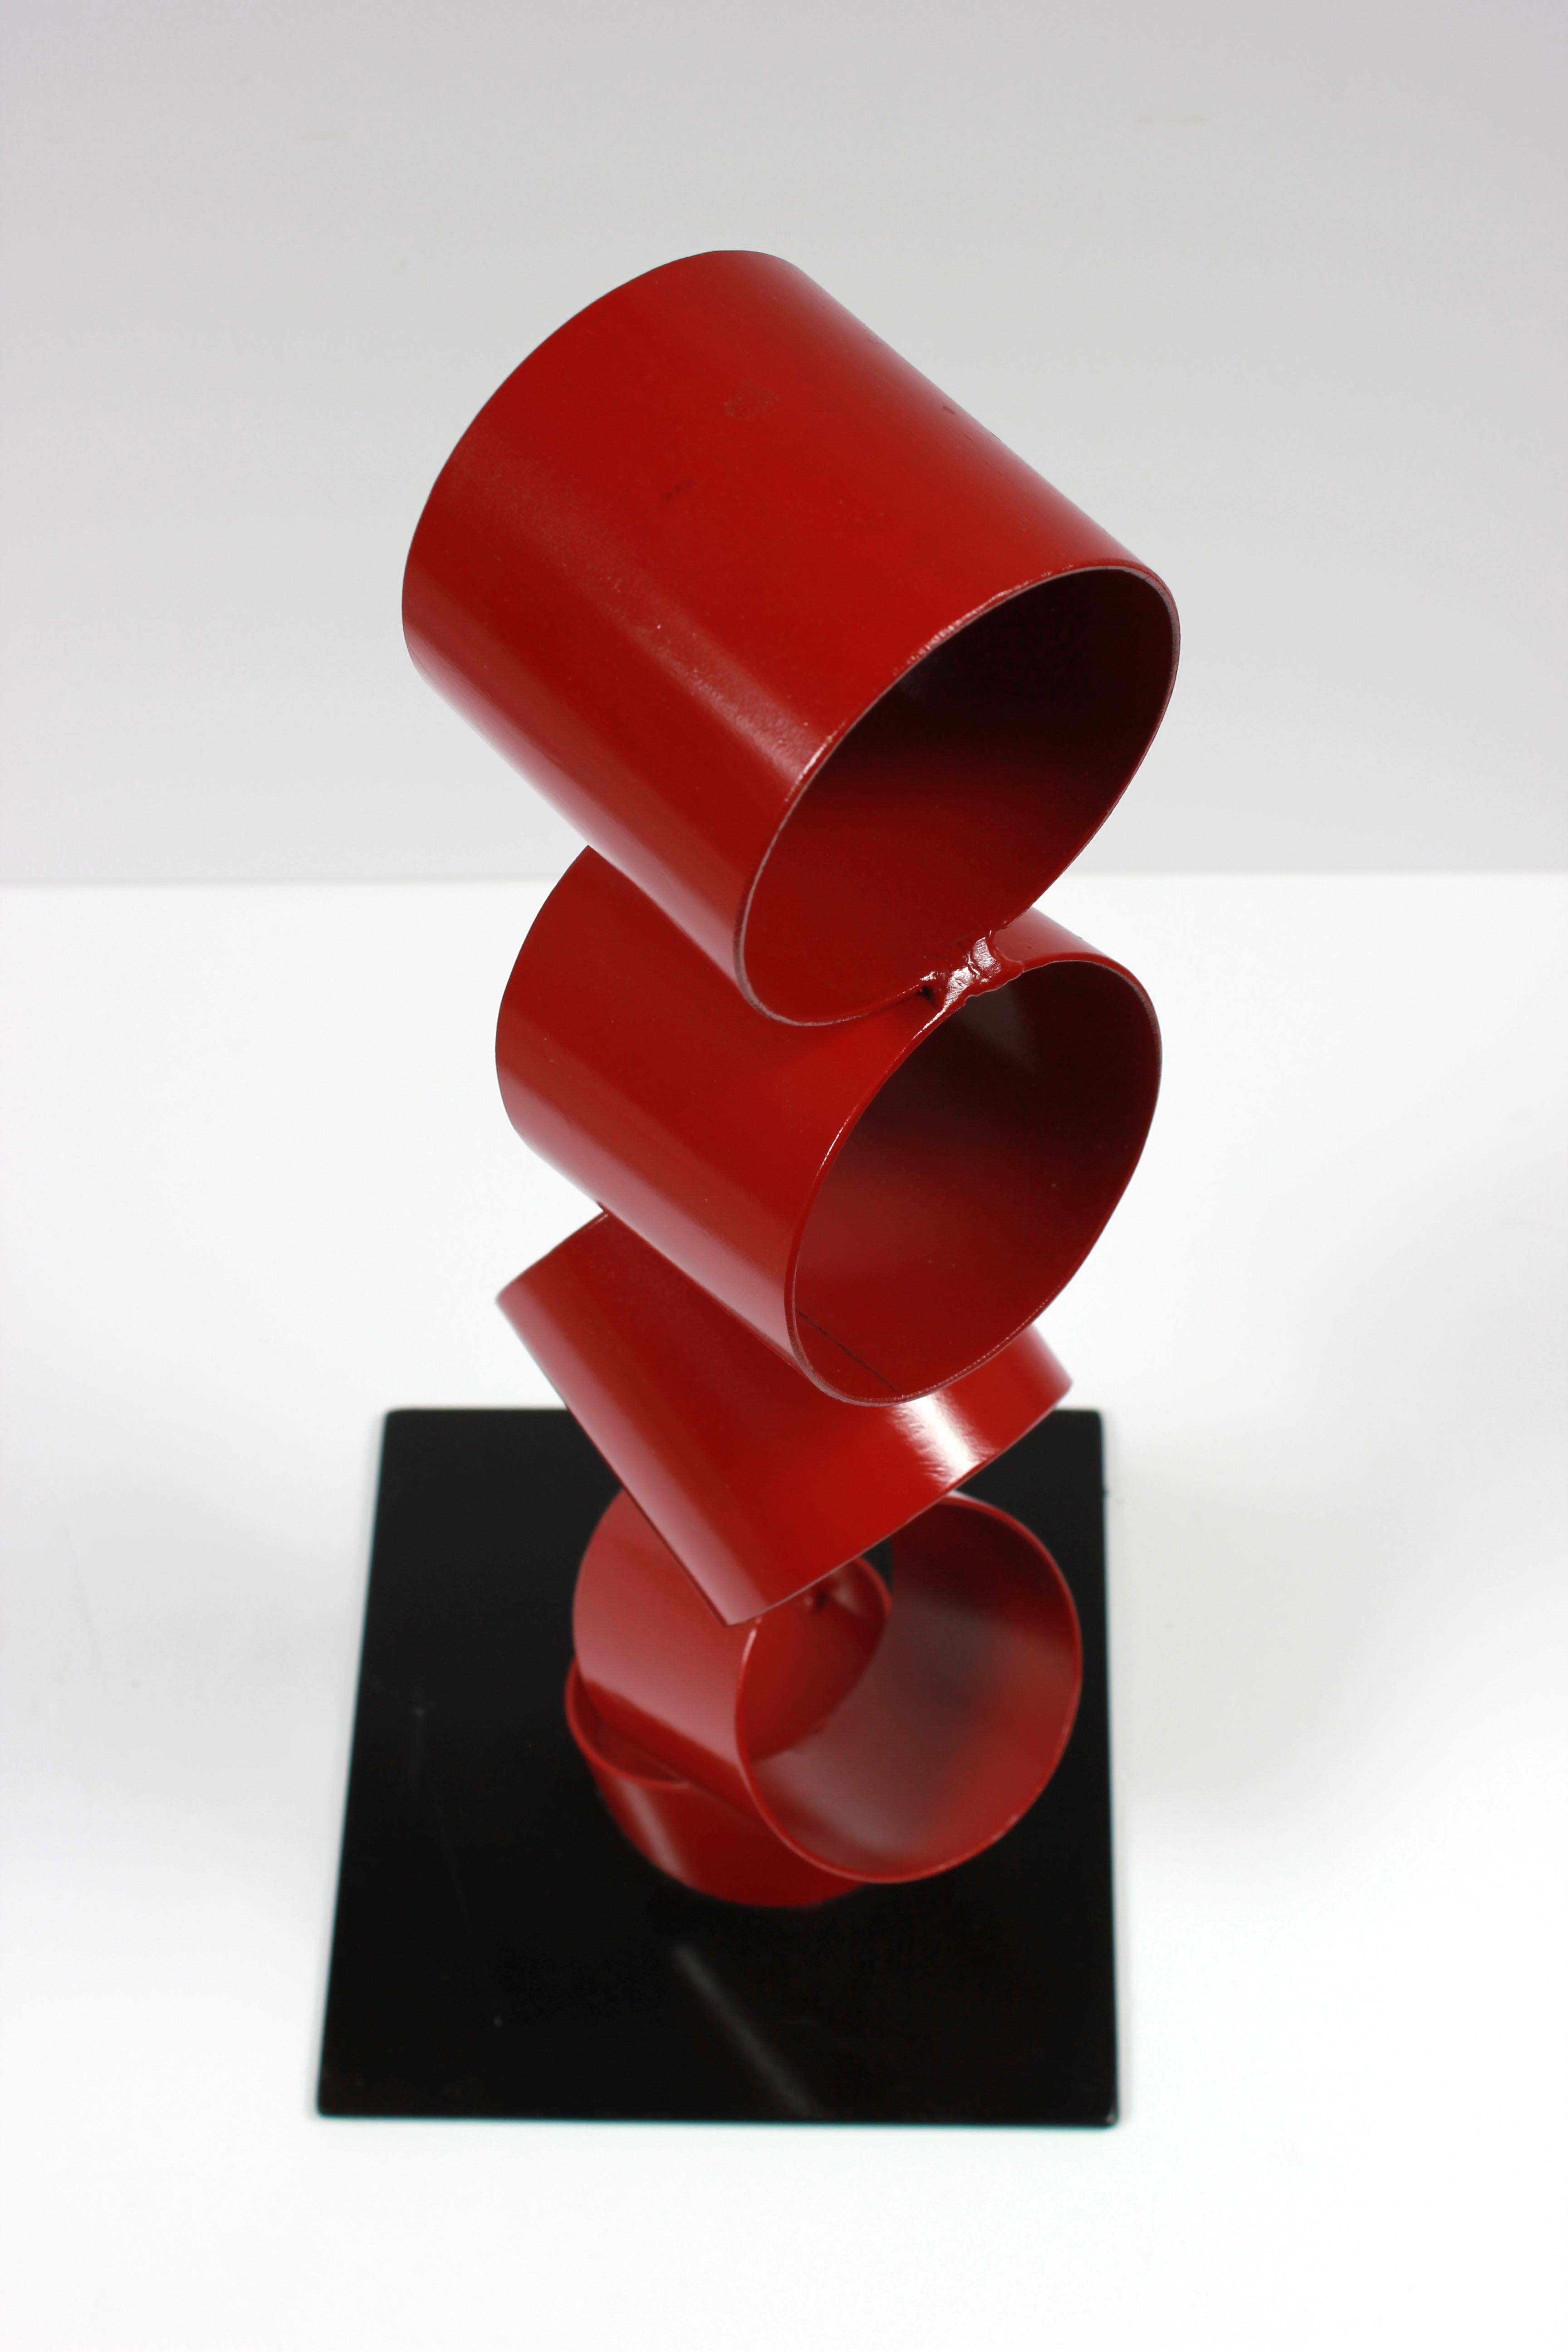 Multimedia Metal Sculpture of Six Red Rings in an Angled Stack 2